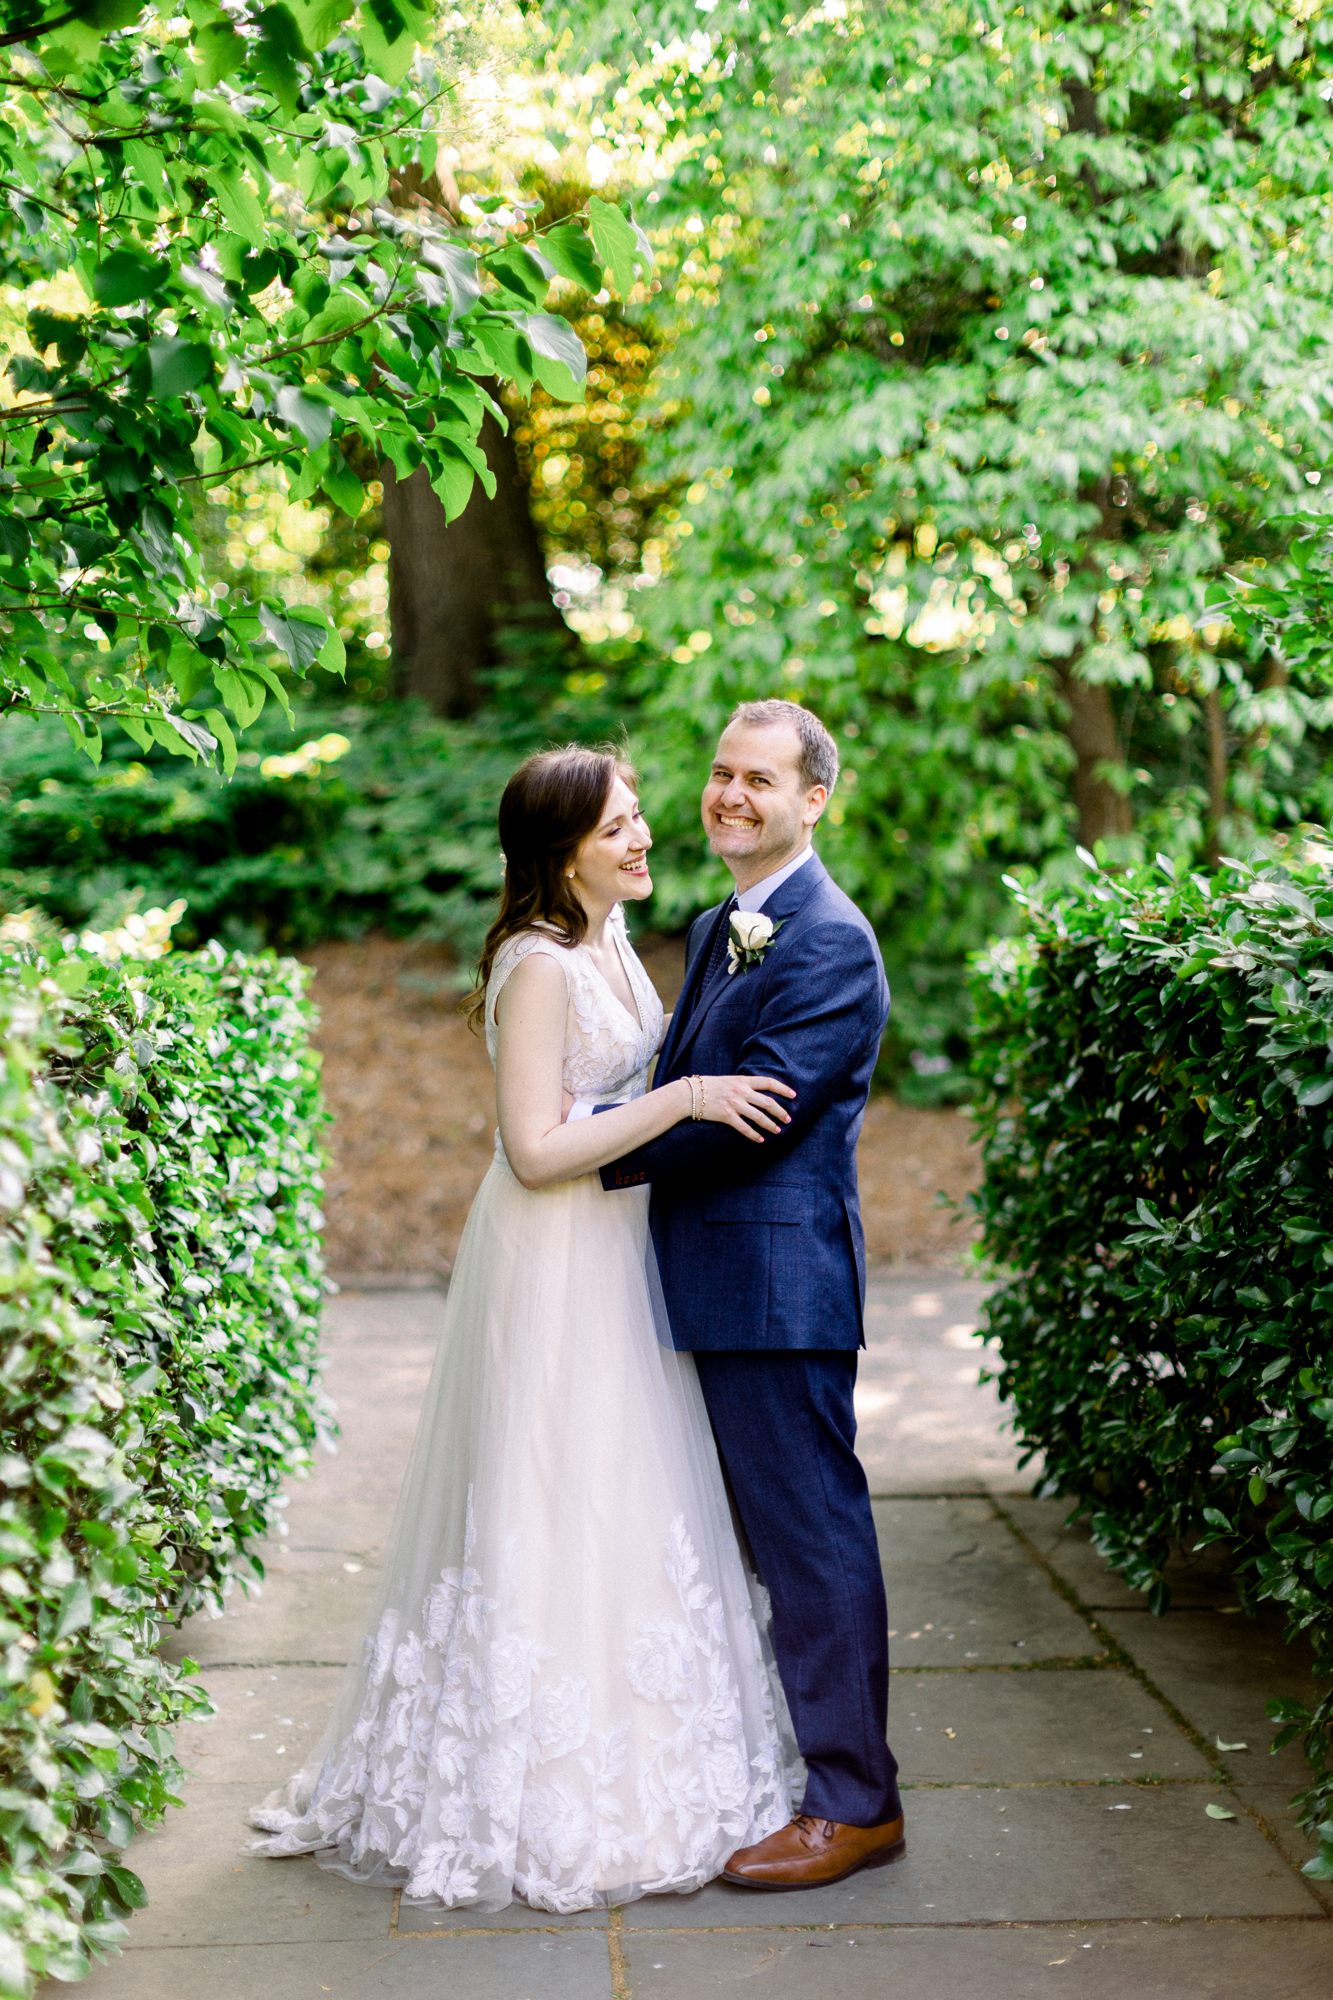 Happy Summer Wedding Photos at the Conservatory Garden in Central Park New York